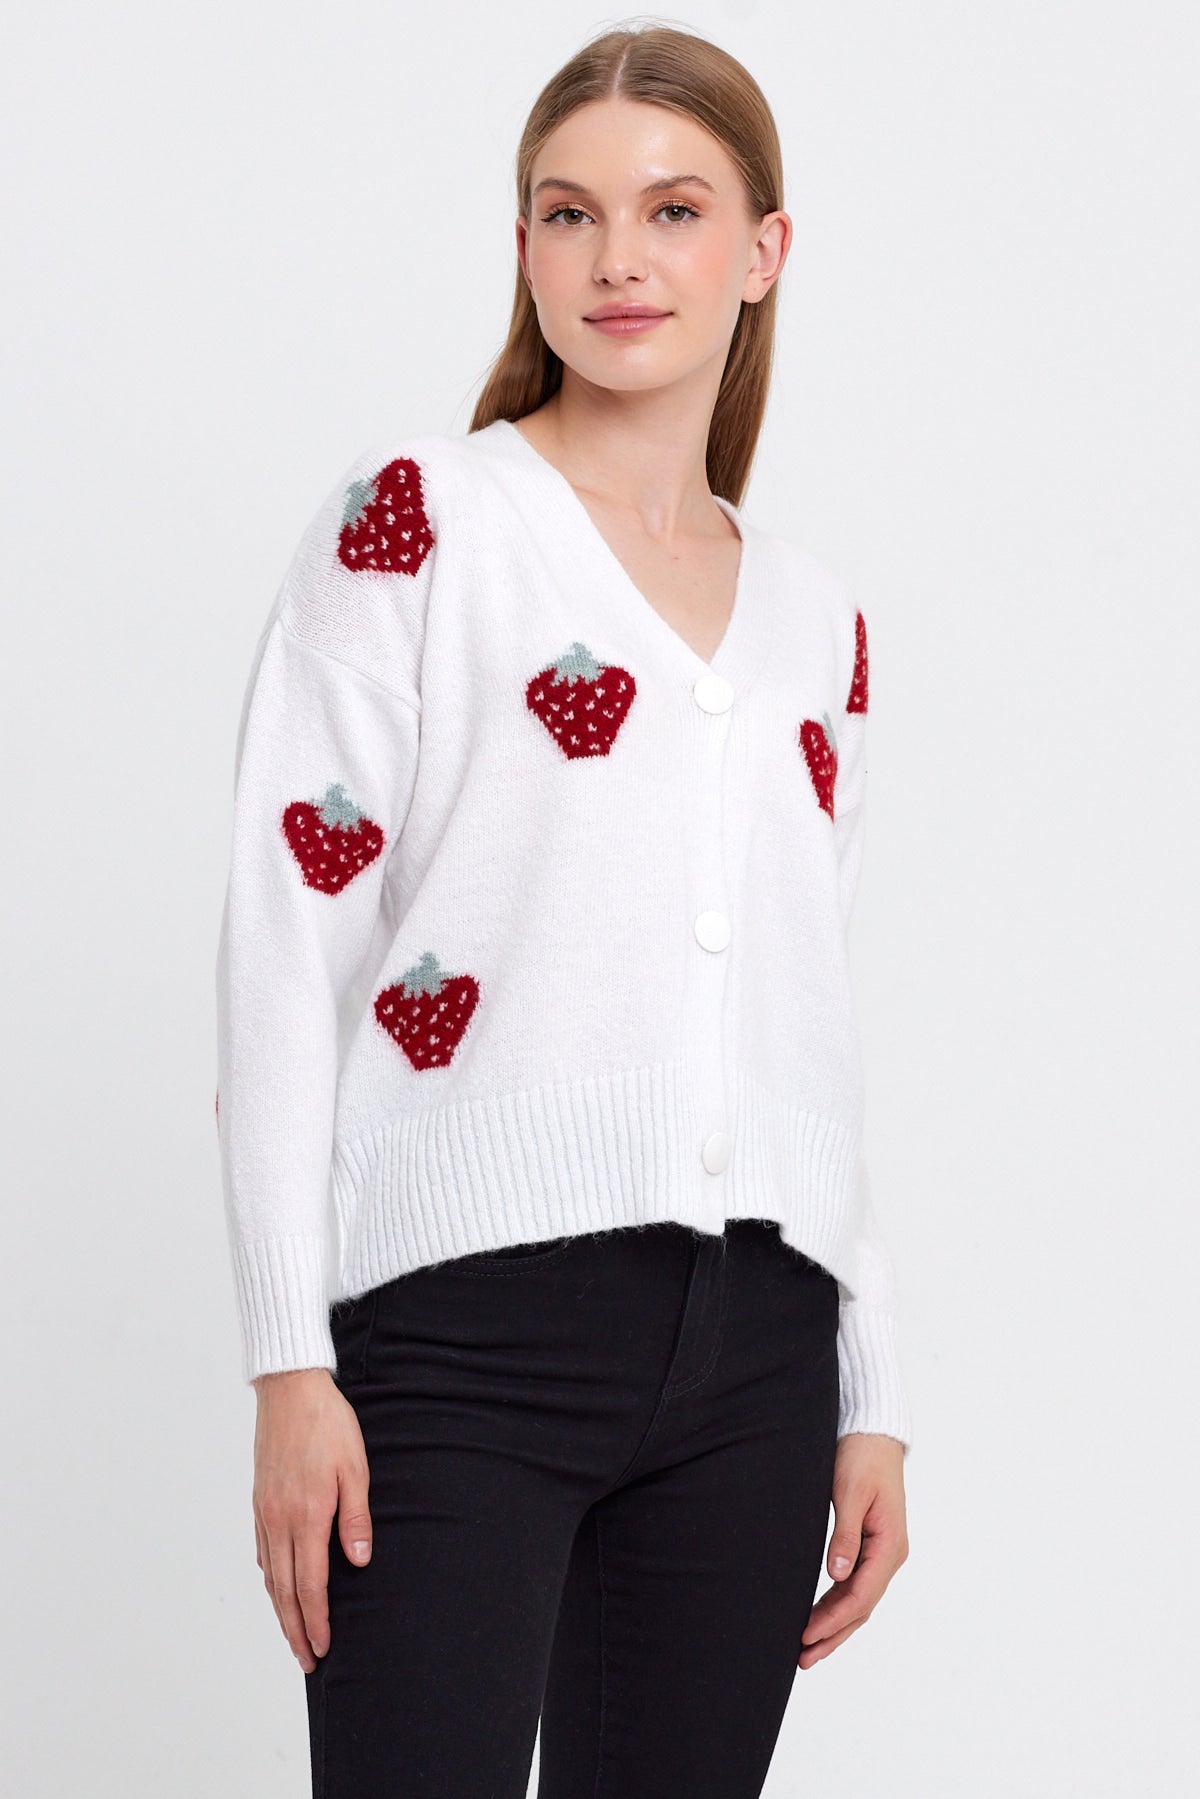 Strawberry Knit Cardigan Cropped - Cute Collection